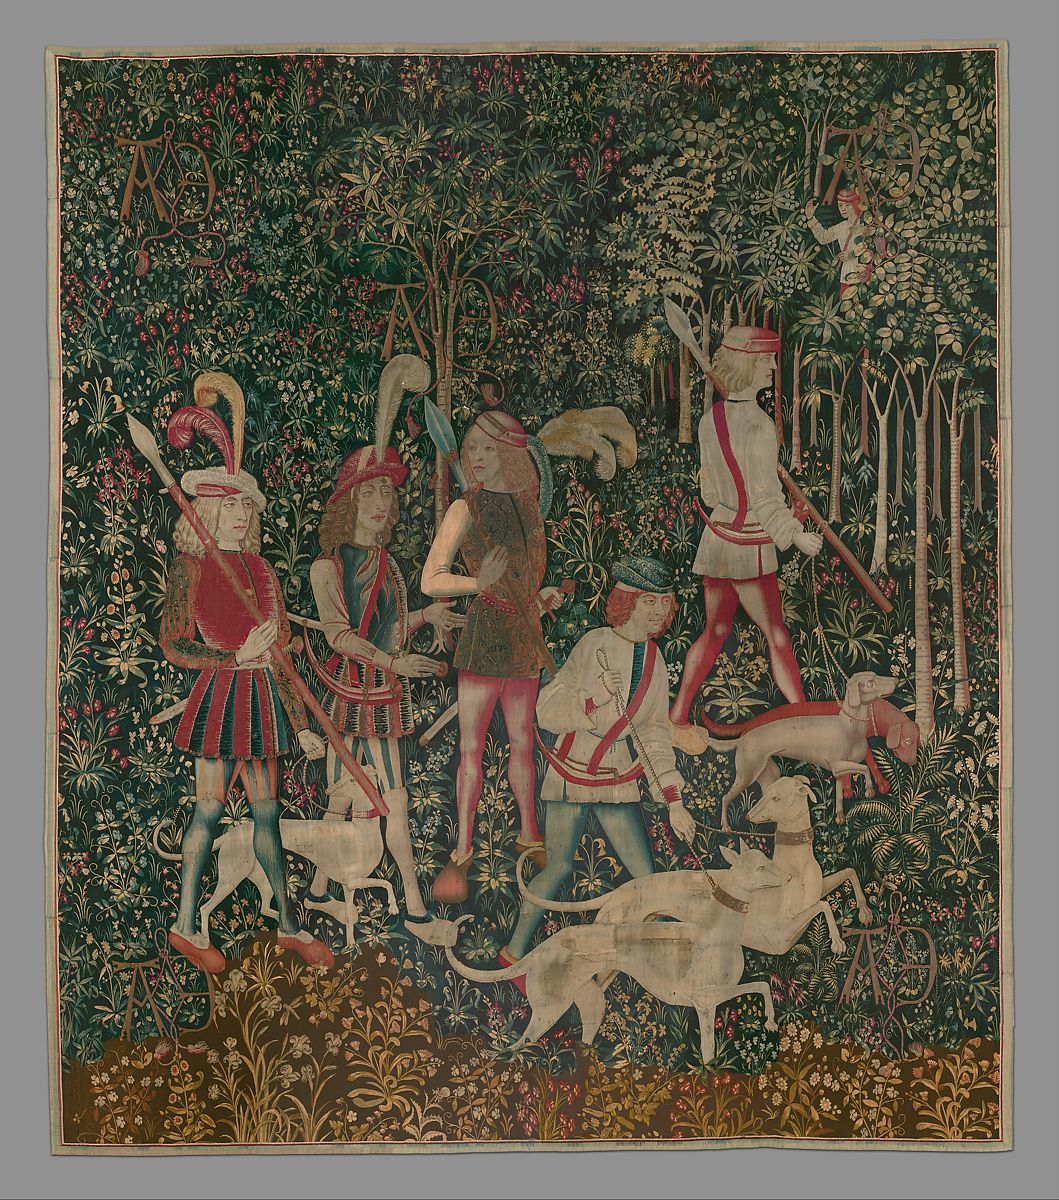 The Hunters enter the Woods tapestry depiction